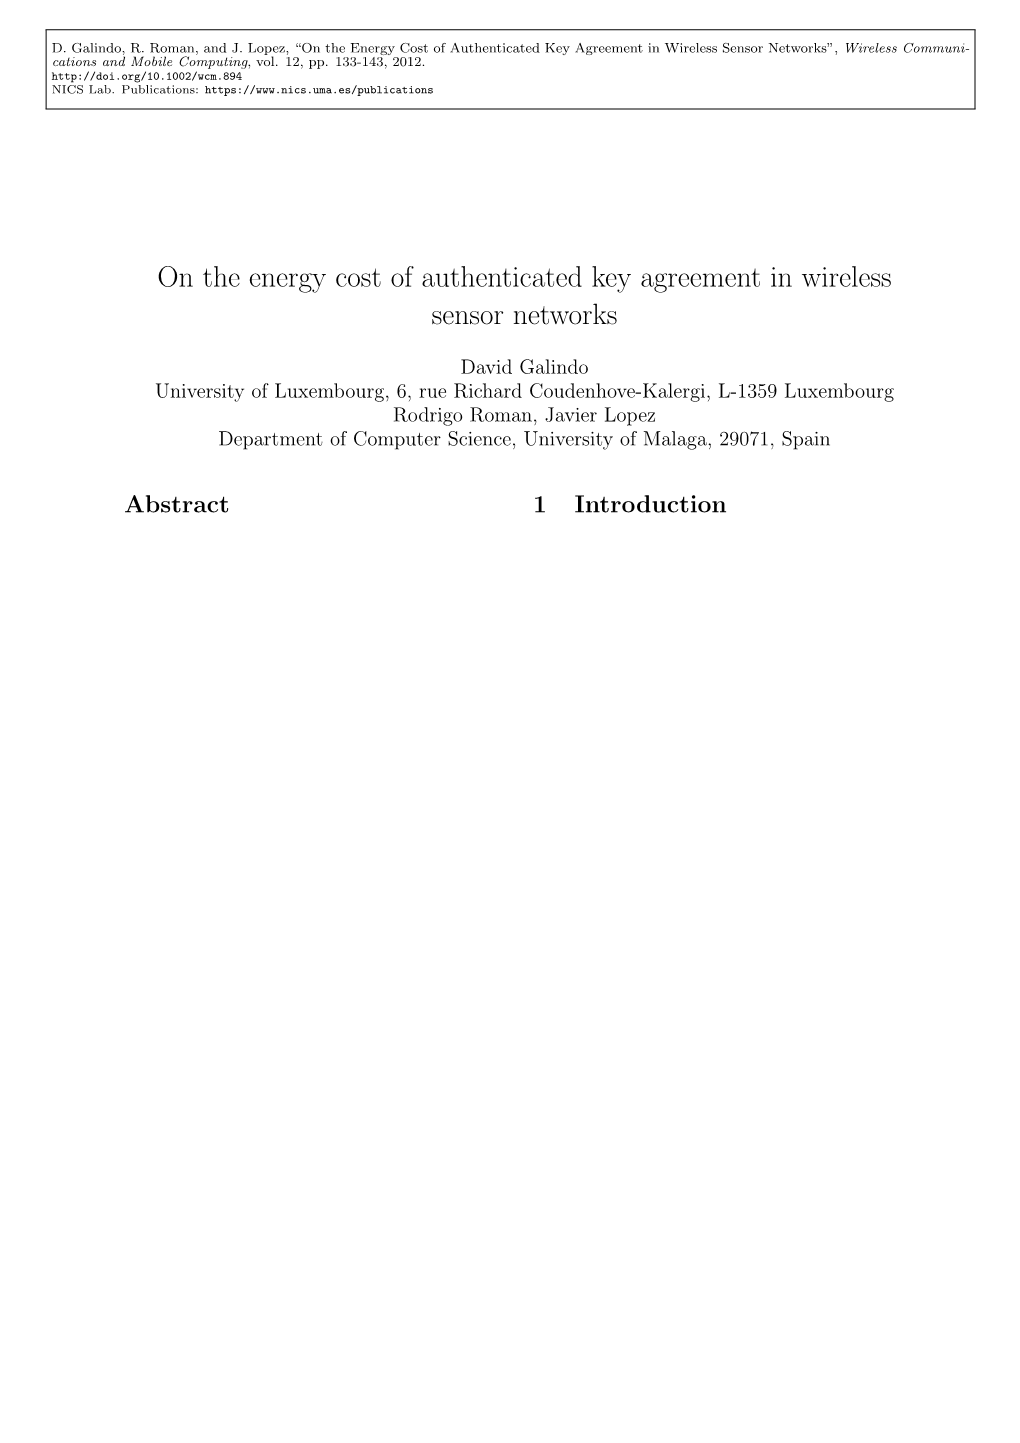 On the Energy Cost of Authenticated Key Agreement in Wireless Sensor Networks”, Wireless Communi- Cations and Mobile Computing, Vol